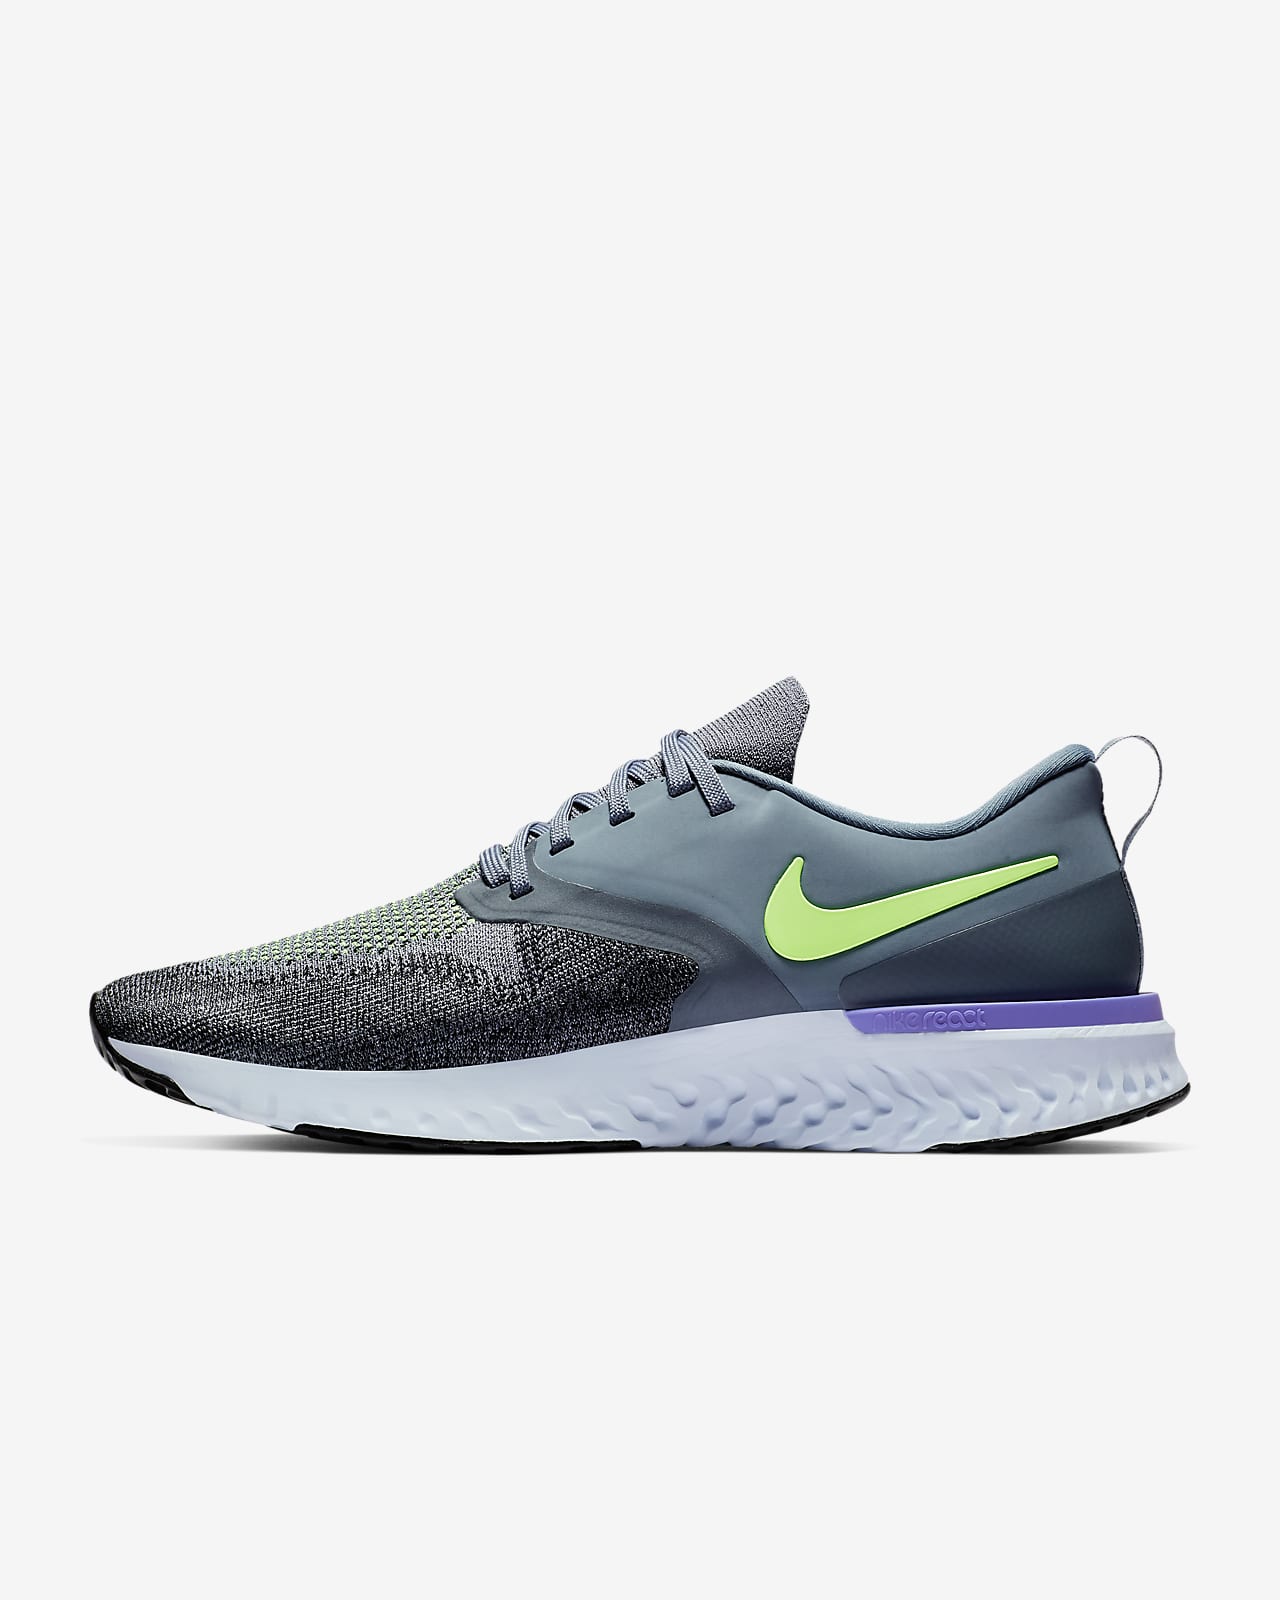 nike women's odyssey react flyknit 2 running shoes review